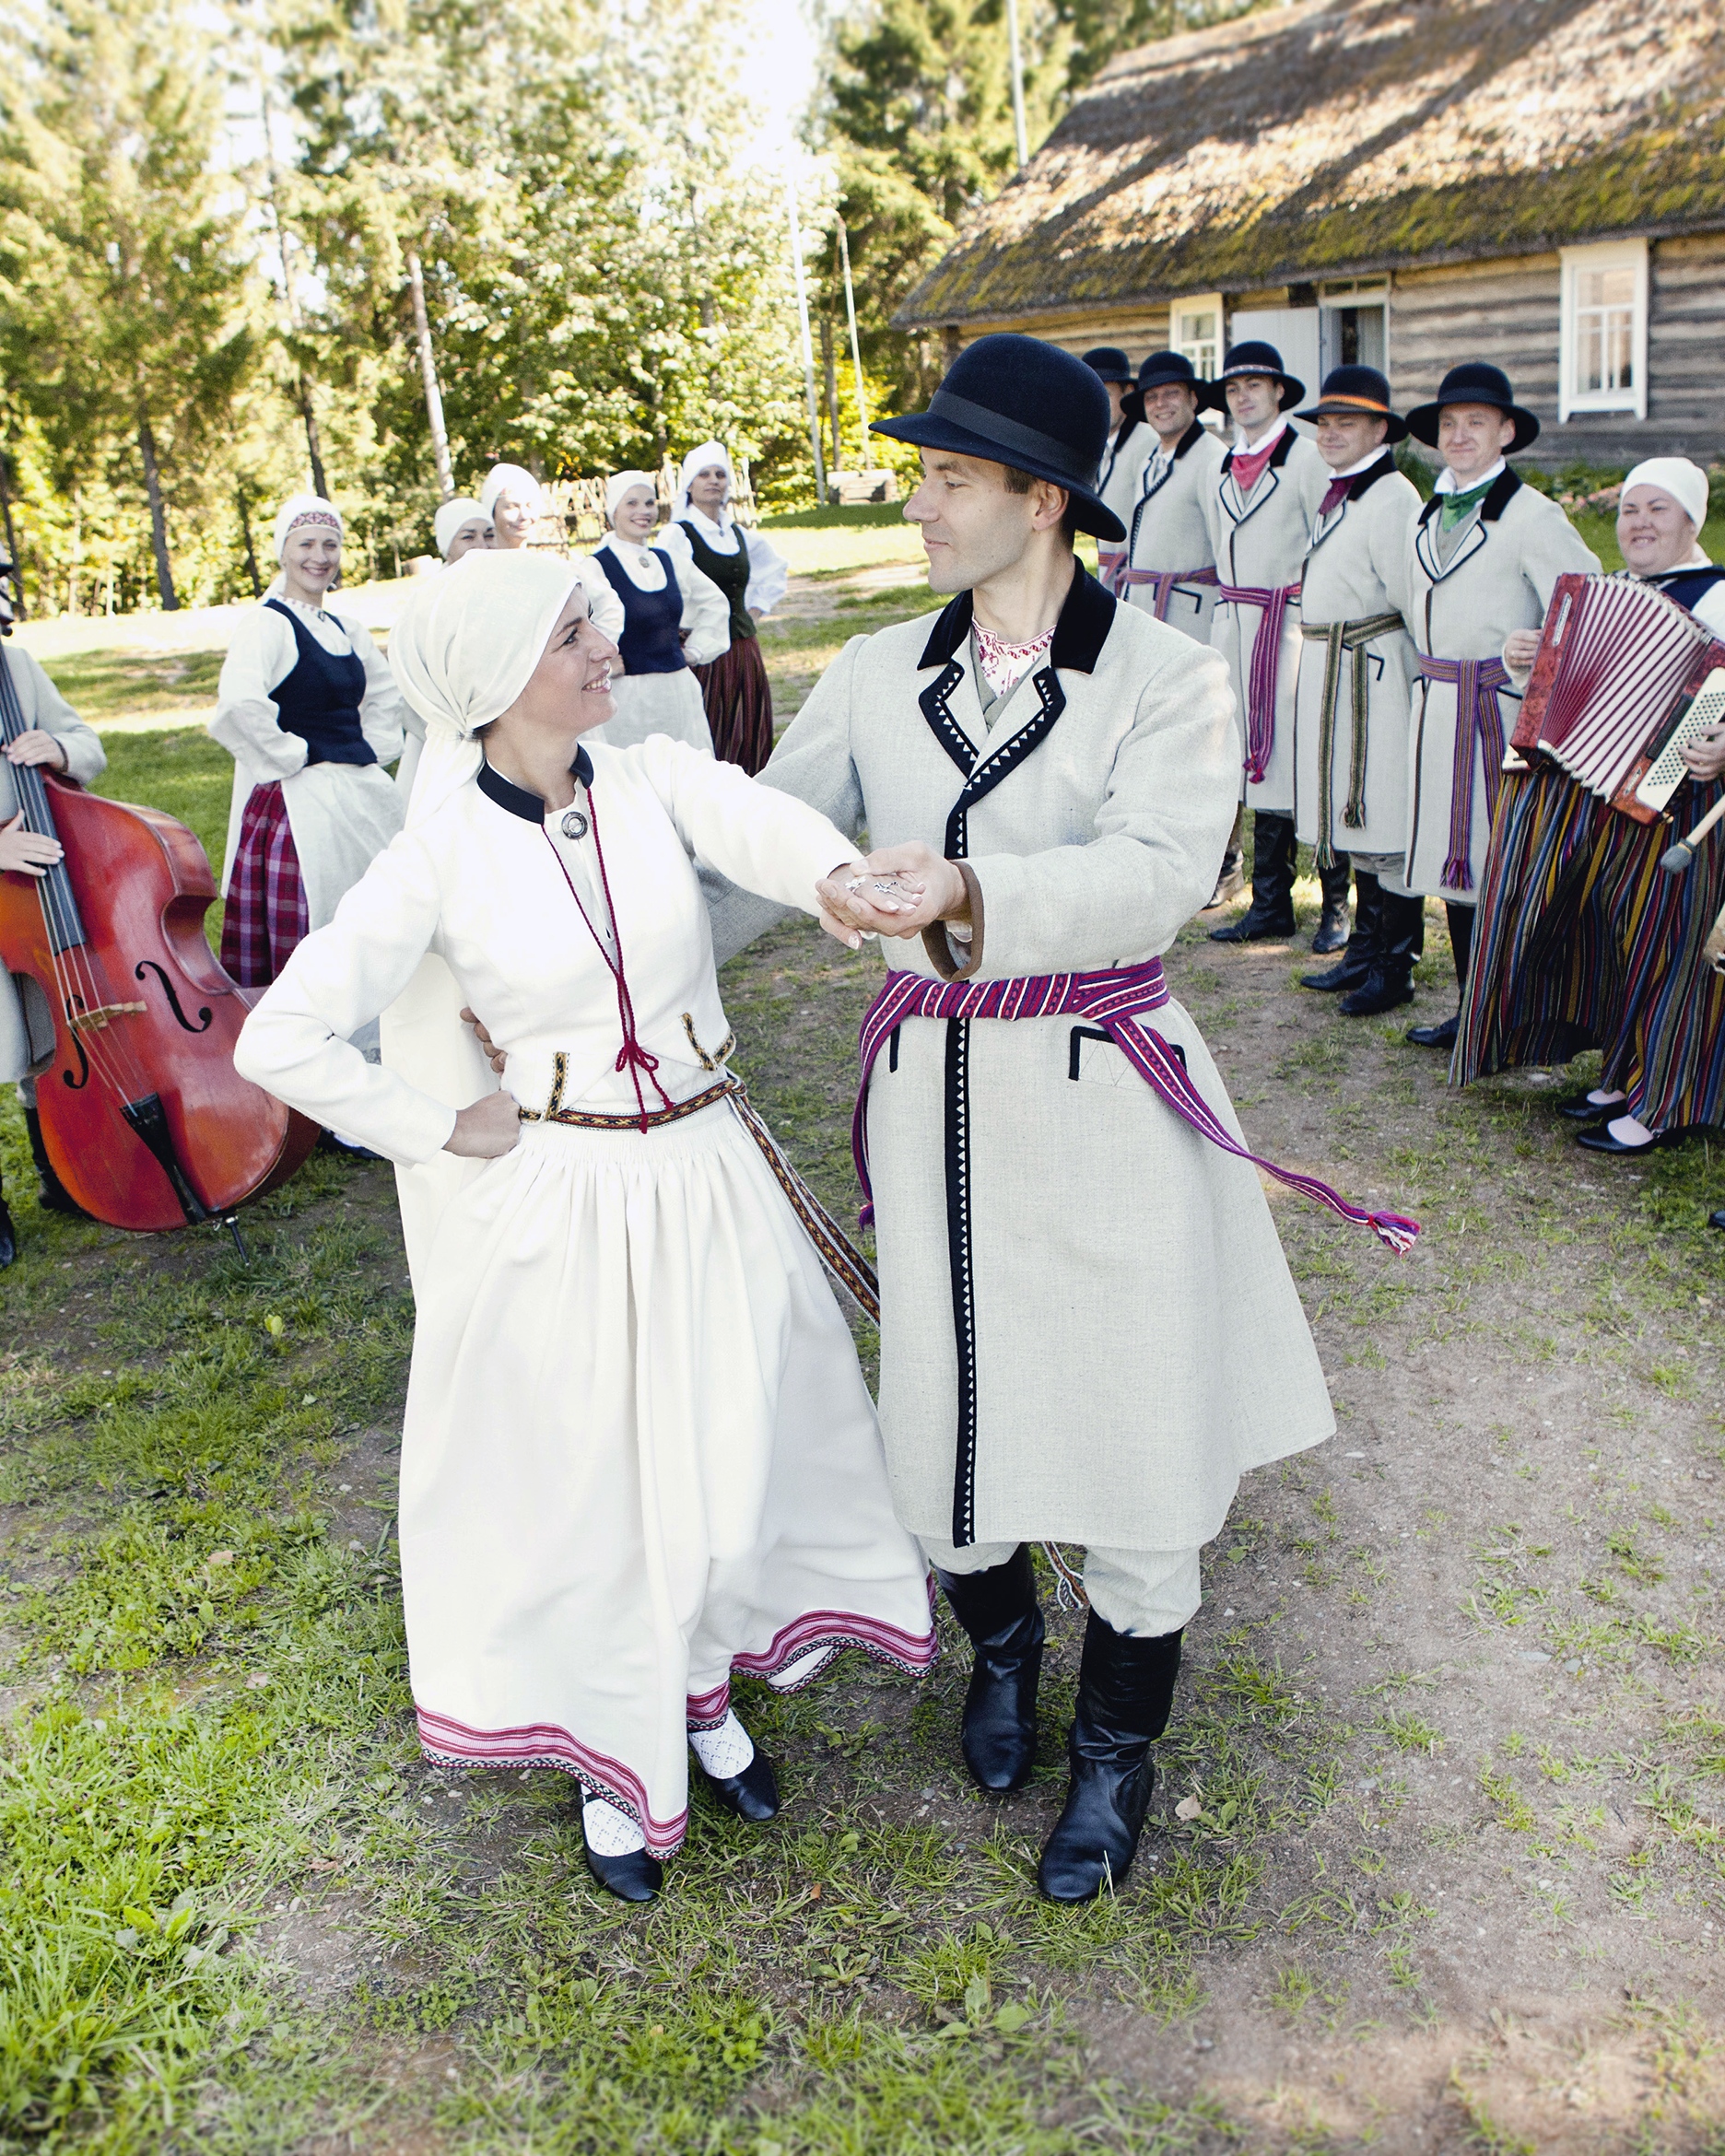 The wedding couple dances in traditional Latvian costumes